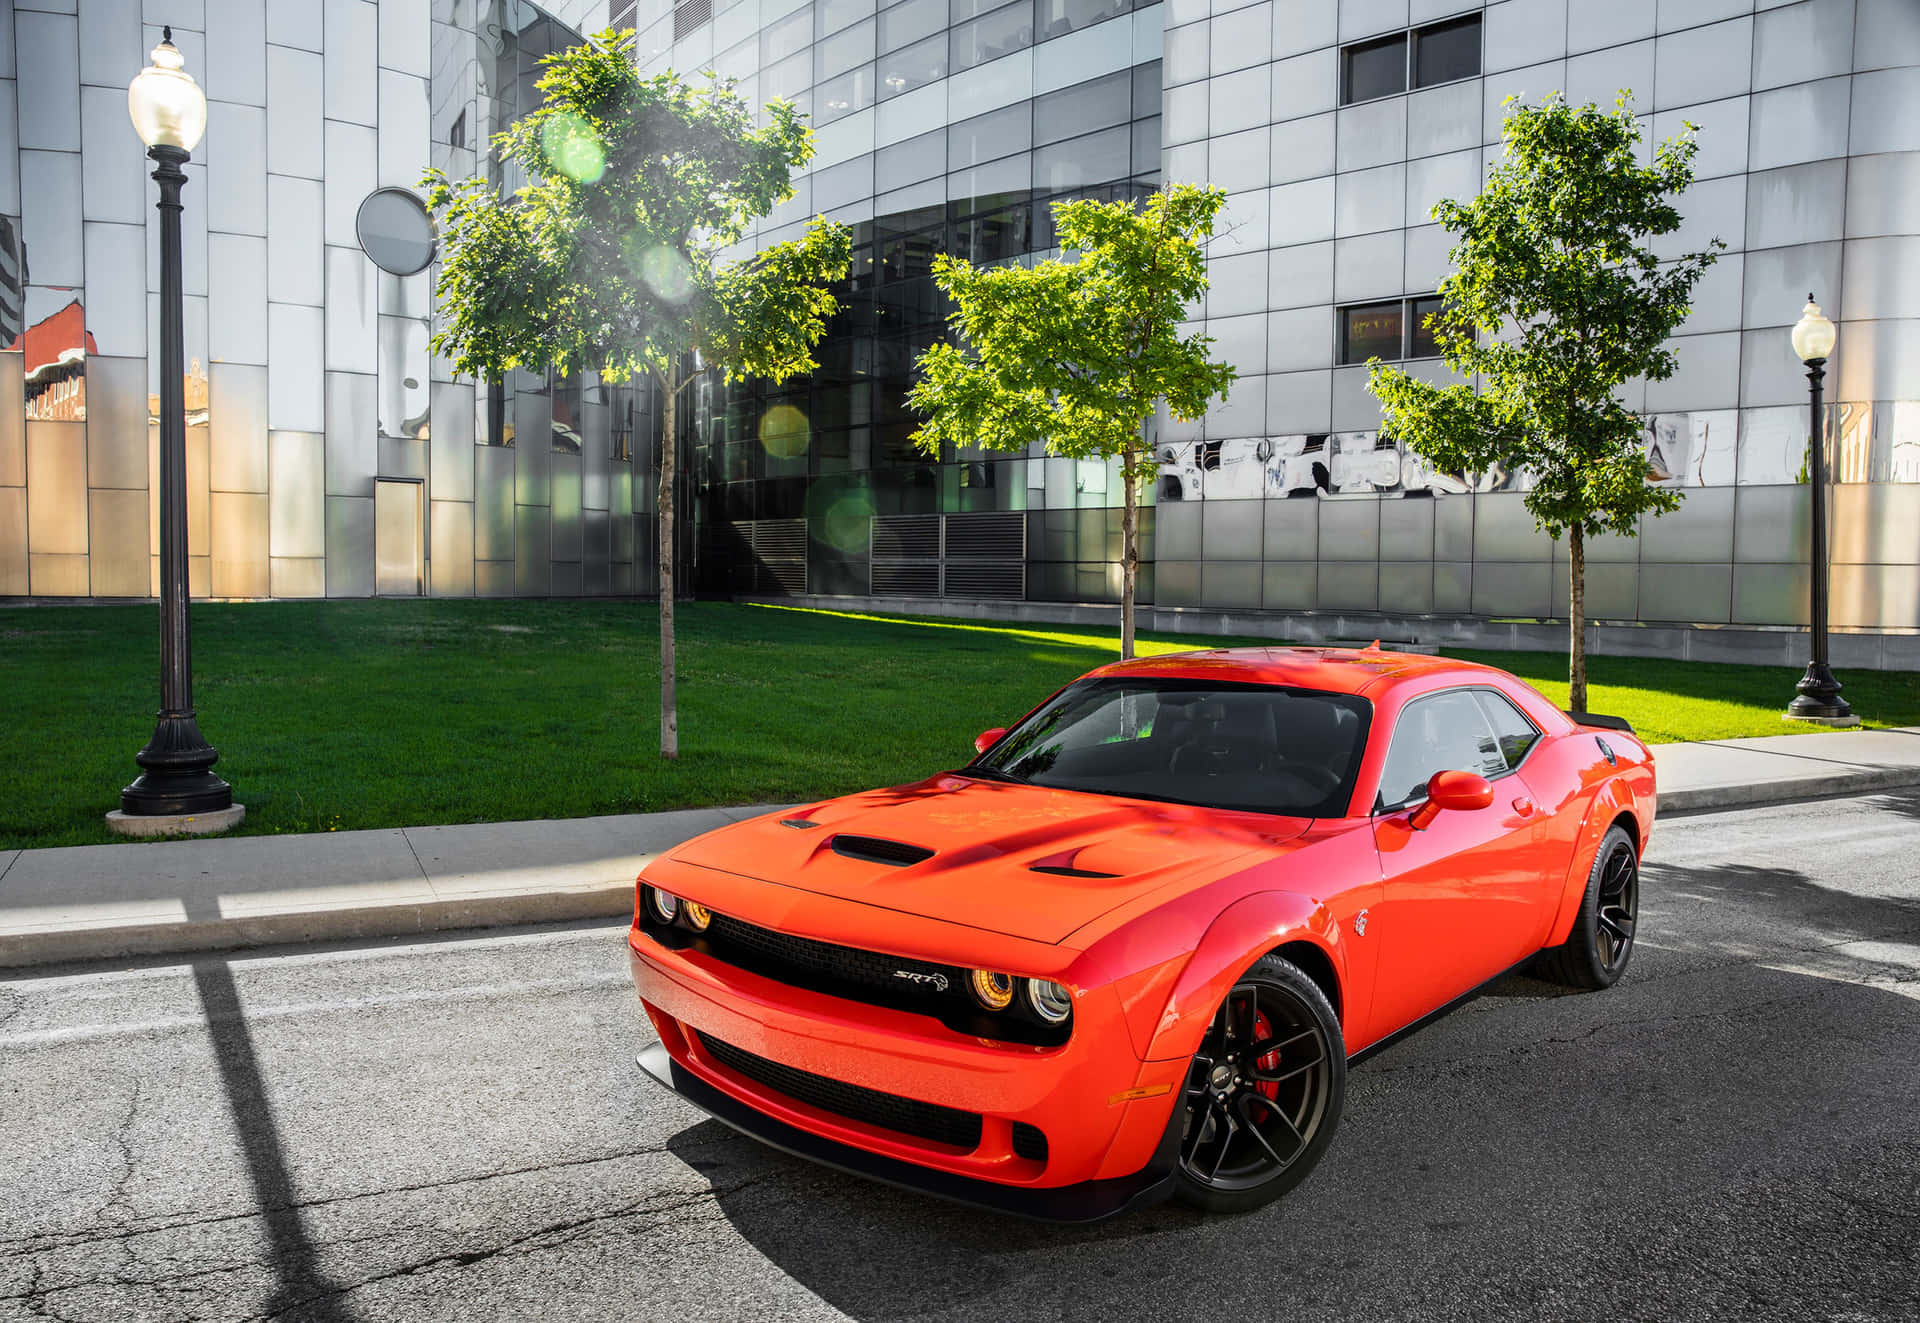 Take a ride in the powerful Dodge Hellcat 4k Wallpaper